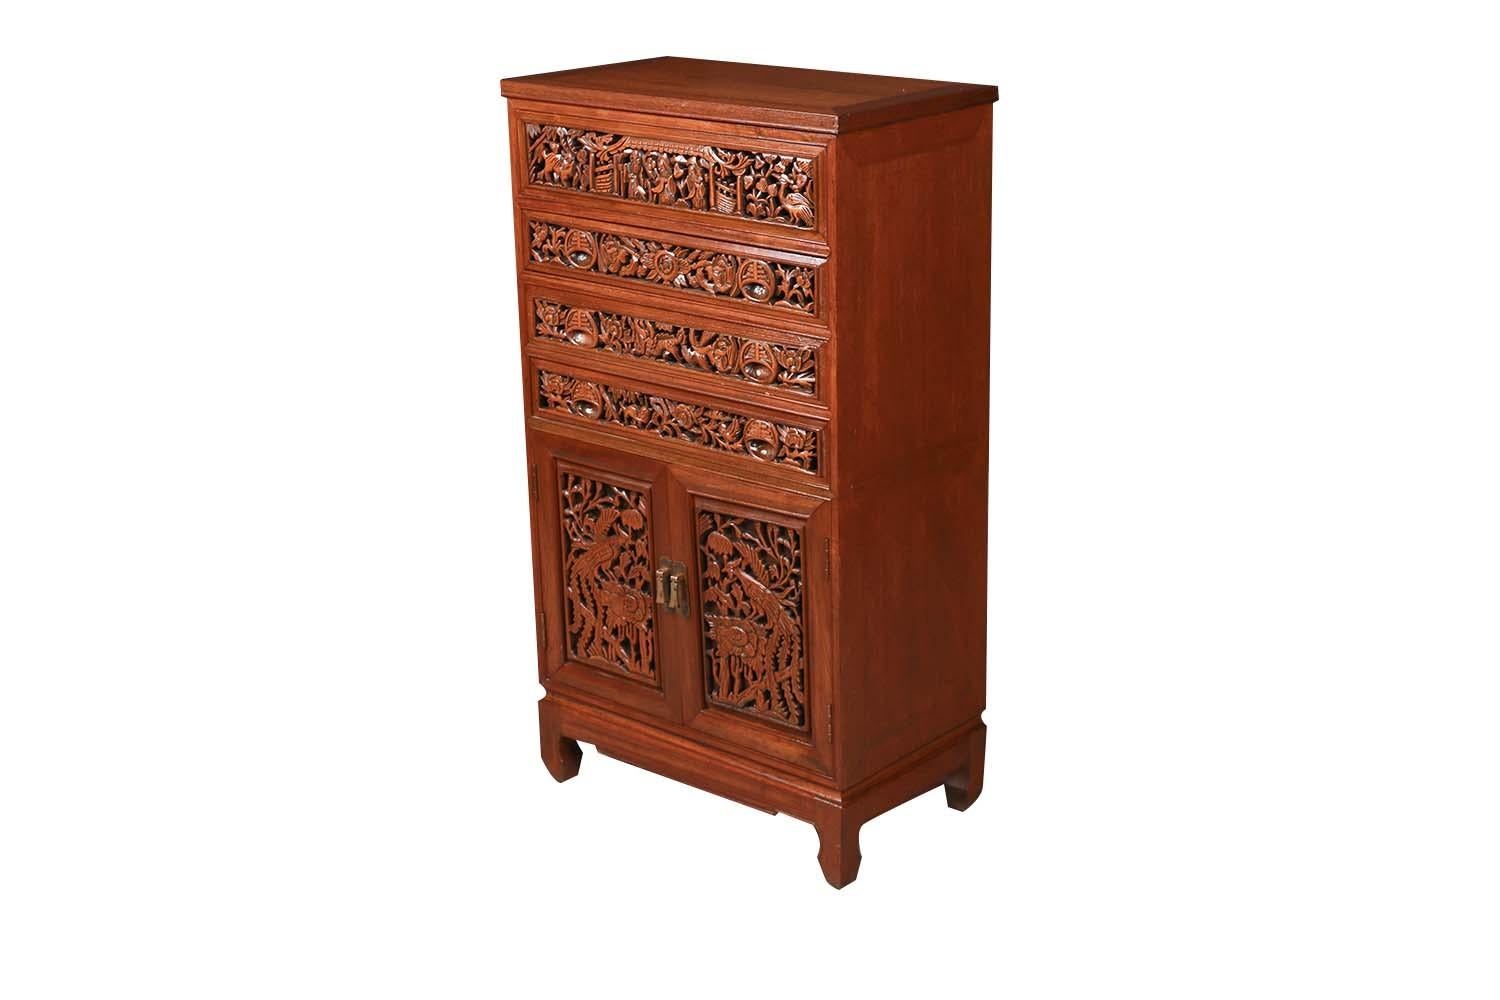 Intricately carved serving vintage silver jewelry buffet cabinet chest of drawers from Southeast Asia, circa 1960s. Features beautiful Chinese wood relief flowers and birds pattern throughout. The hinged top lifts to reveal a red velvet lined